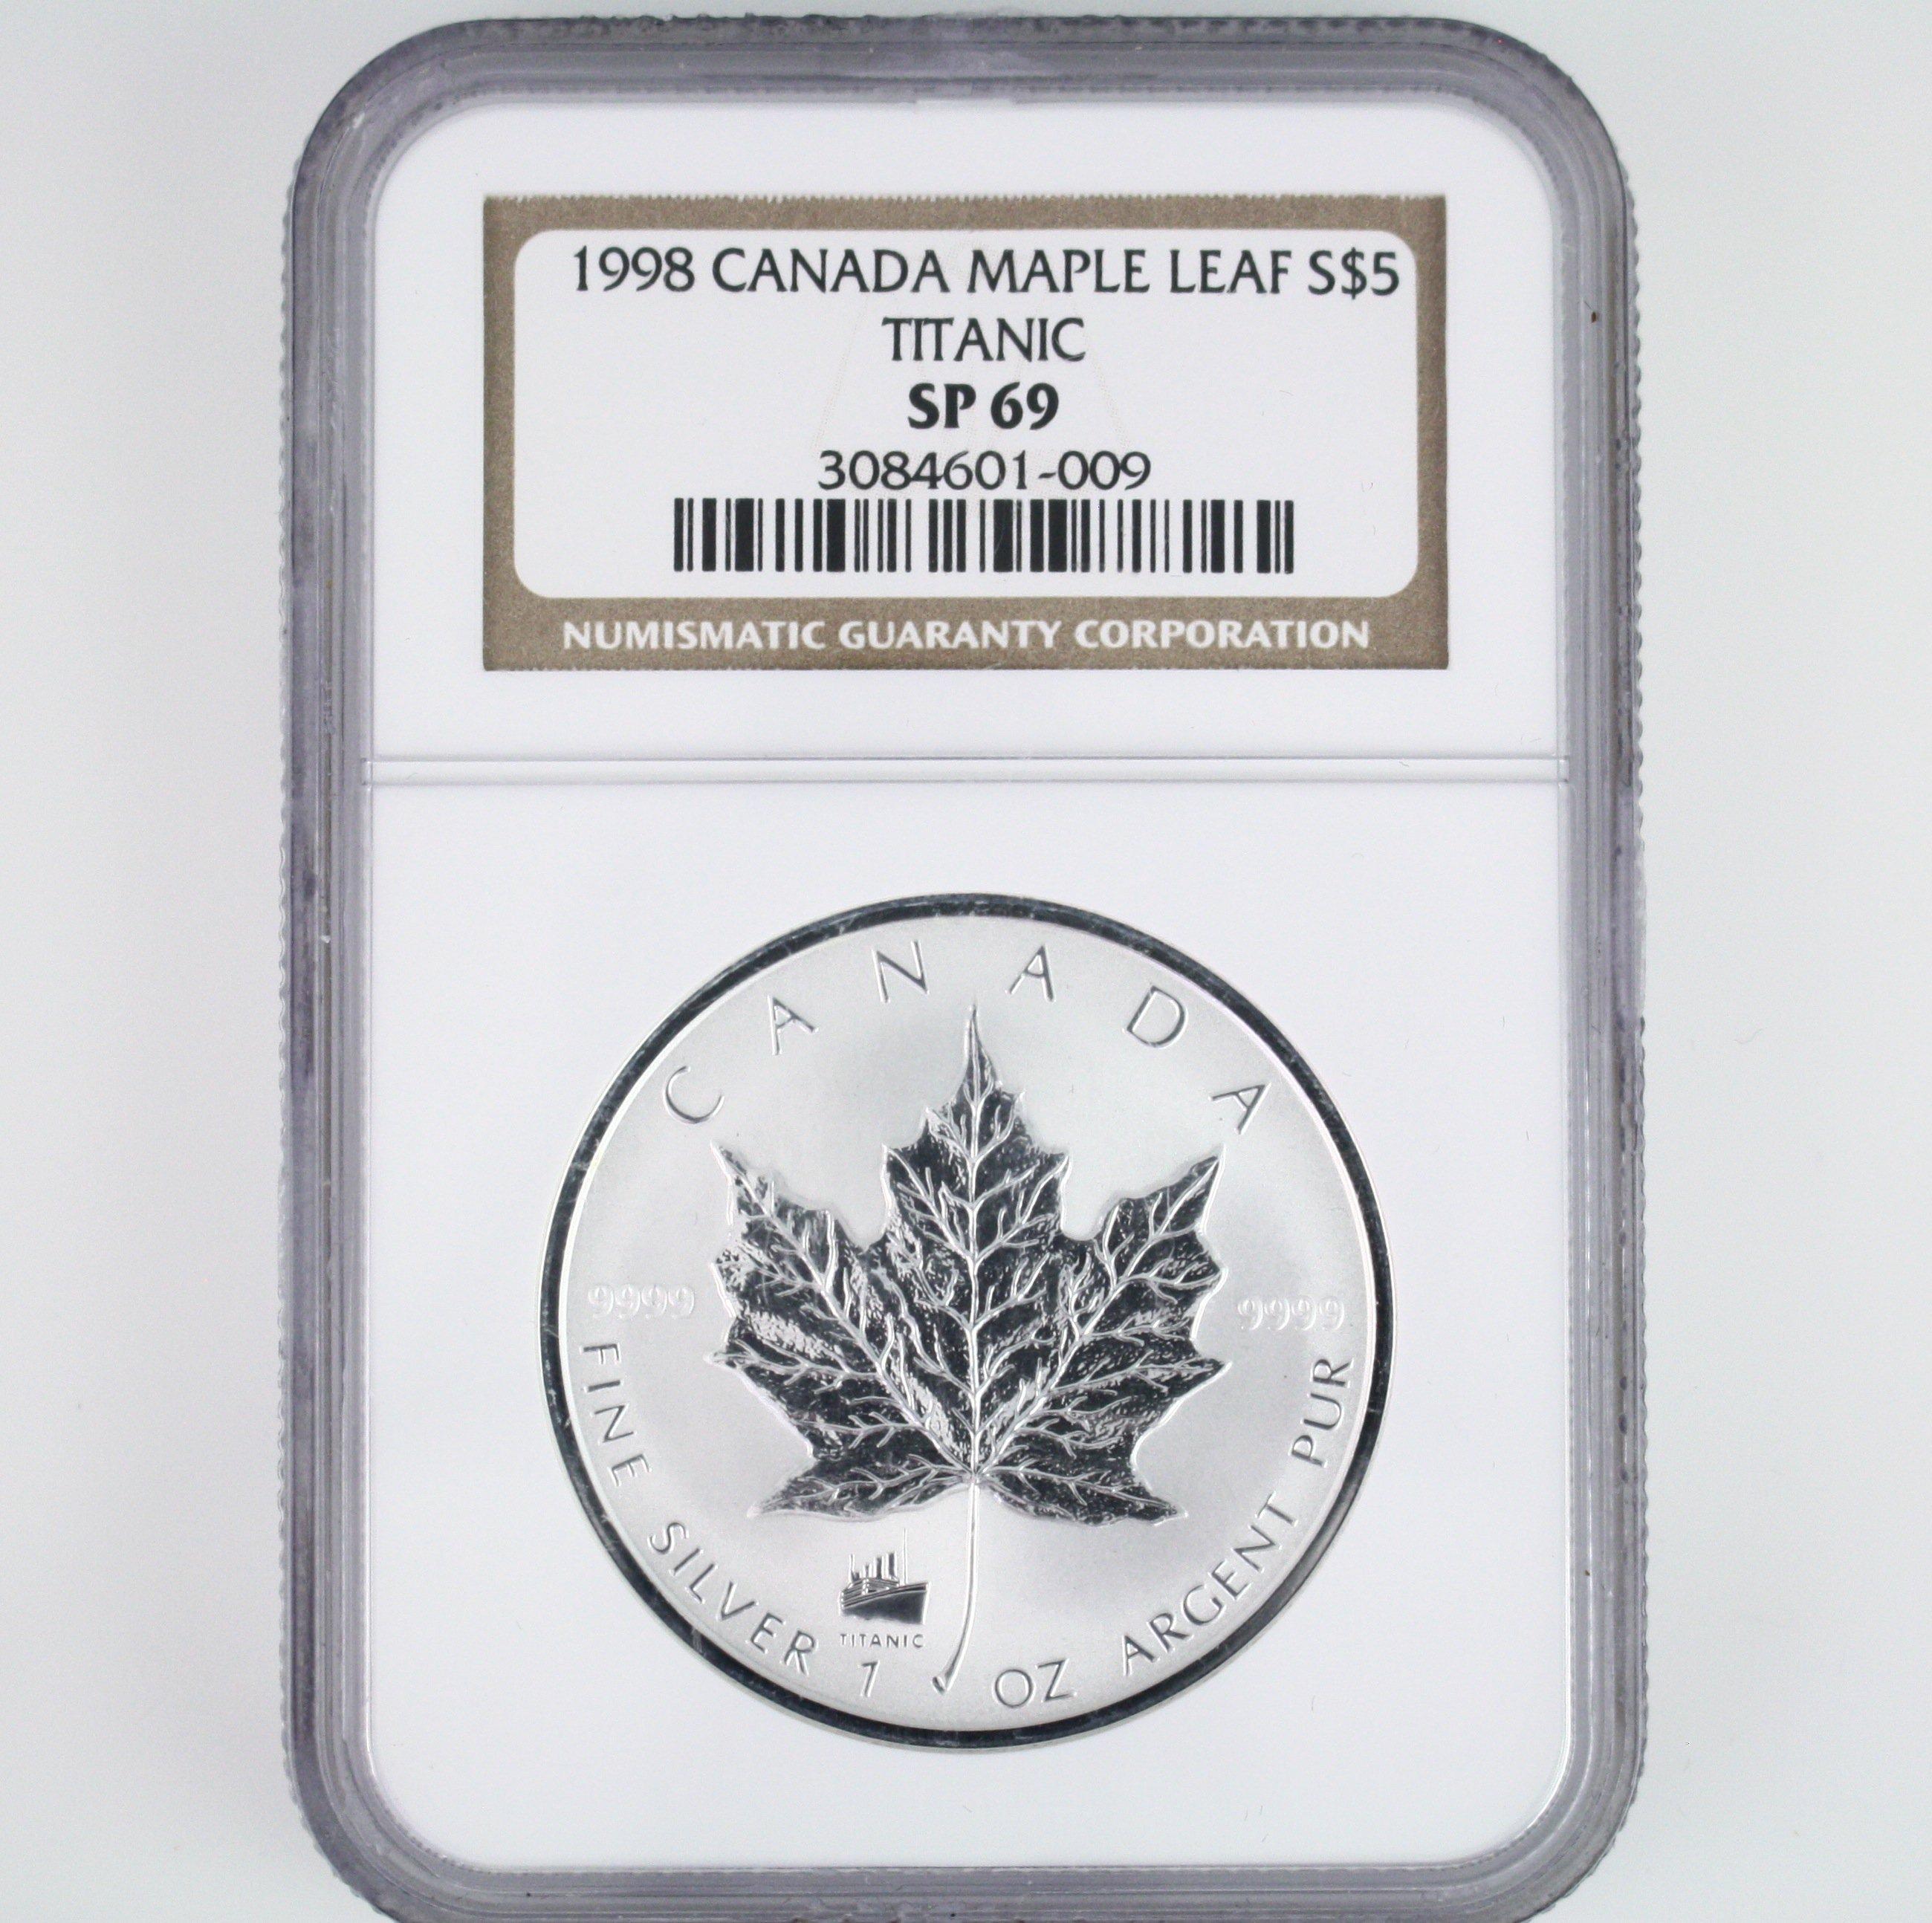 Certified 1998 Canada proof silver Titanic Maple Leaf